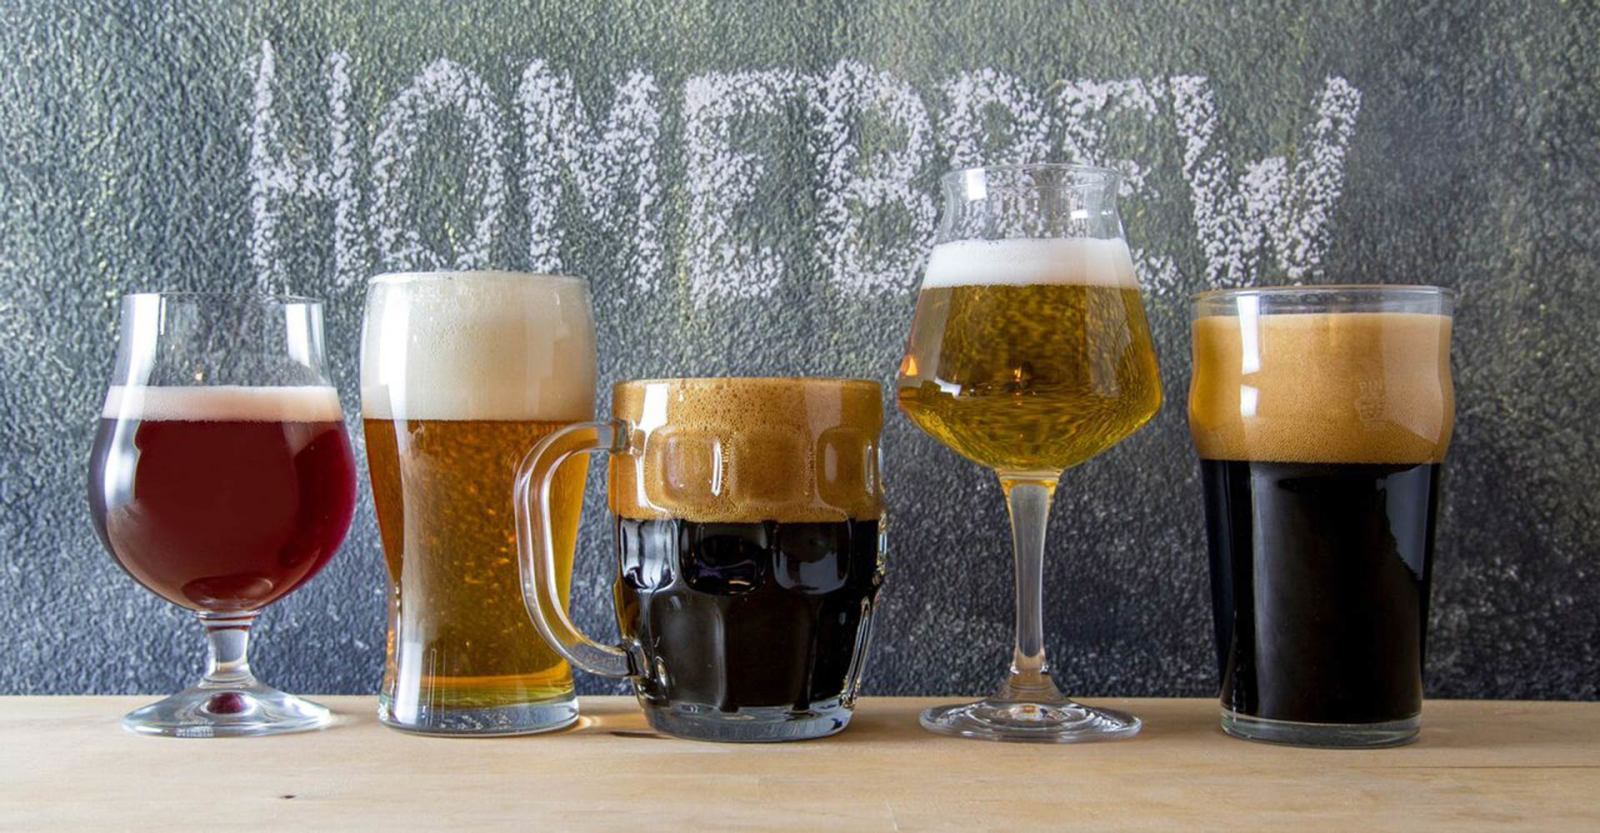 With So Much Craft Beer, Why Brew At Home? | Craft Beer & Brewing